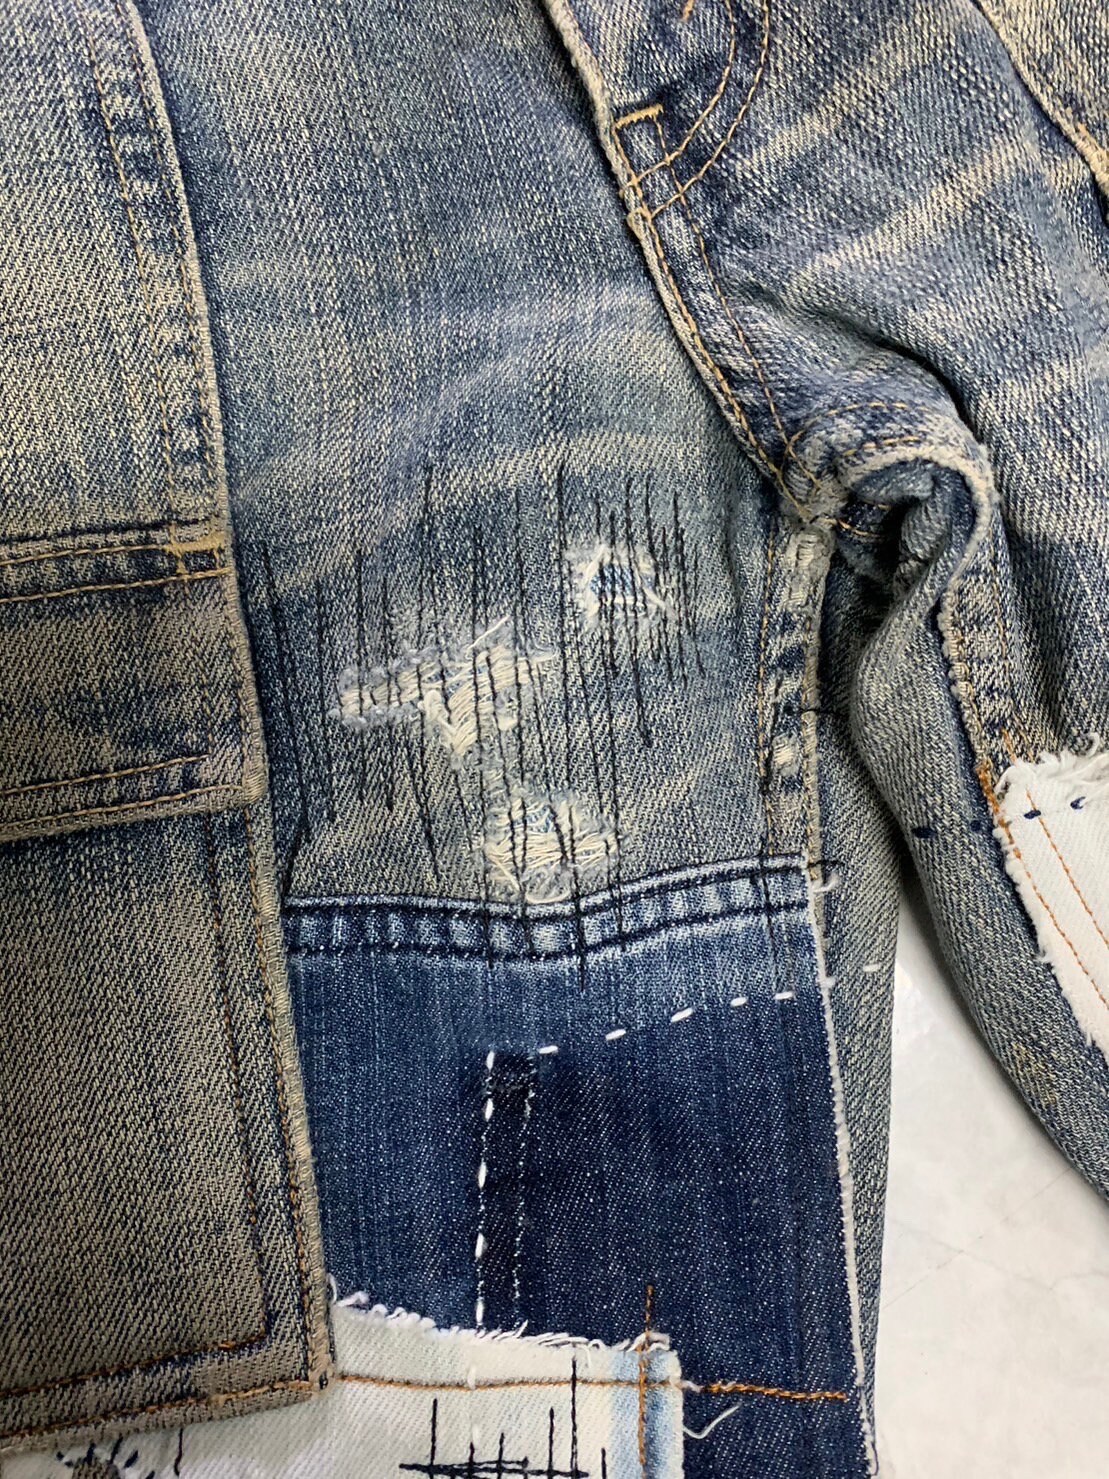 Rare Unique Vintage Patchwork Jeans Reworked Street Style Repair Frayed ...